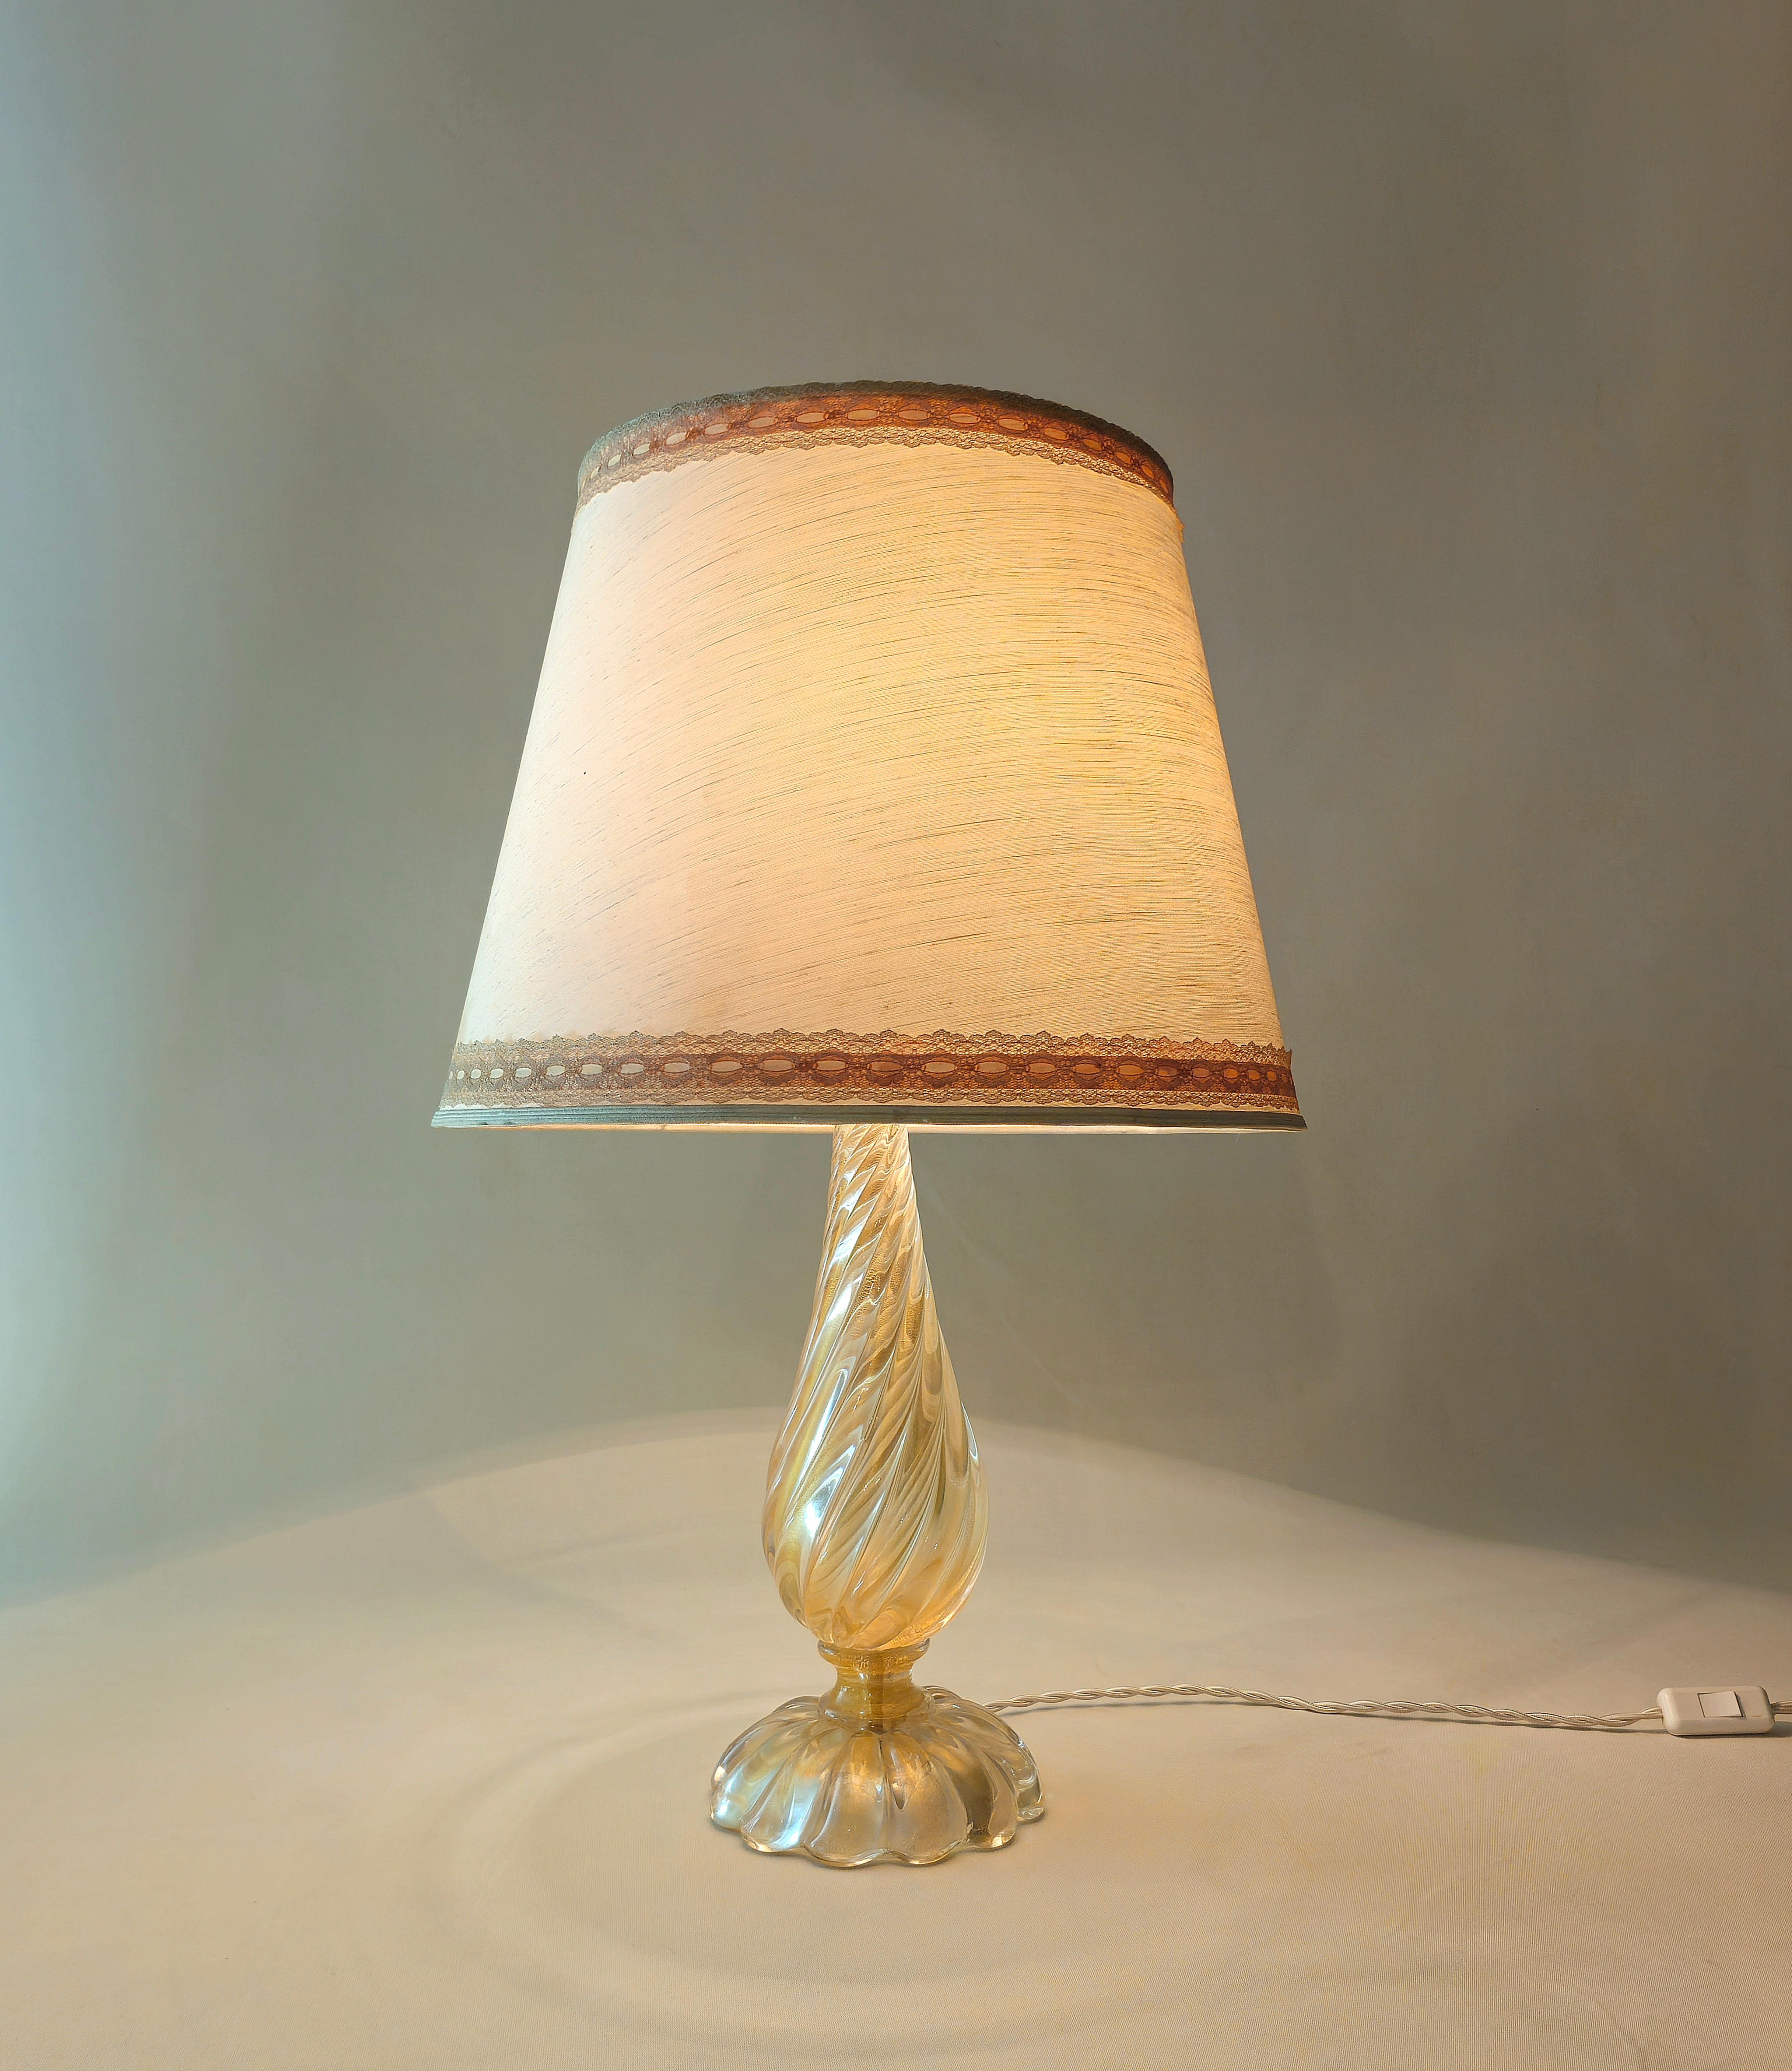 Barovier & Toso, Italy 1970s.
Large 1-light E27 table lamp with transparent and gold ribbed Murano glass, teardrop stem, circular ribbed base and ivory fabric lampshade with embroidered border.

Note: We try to offer our customers an excellent